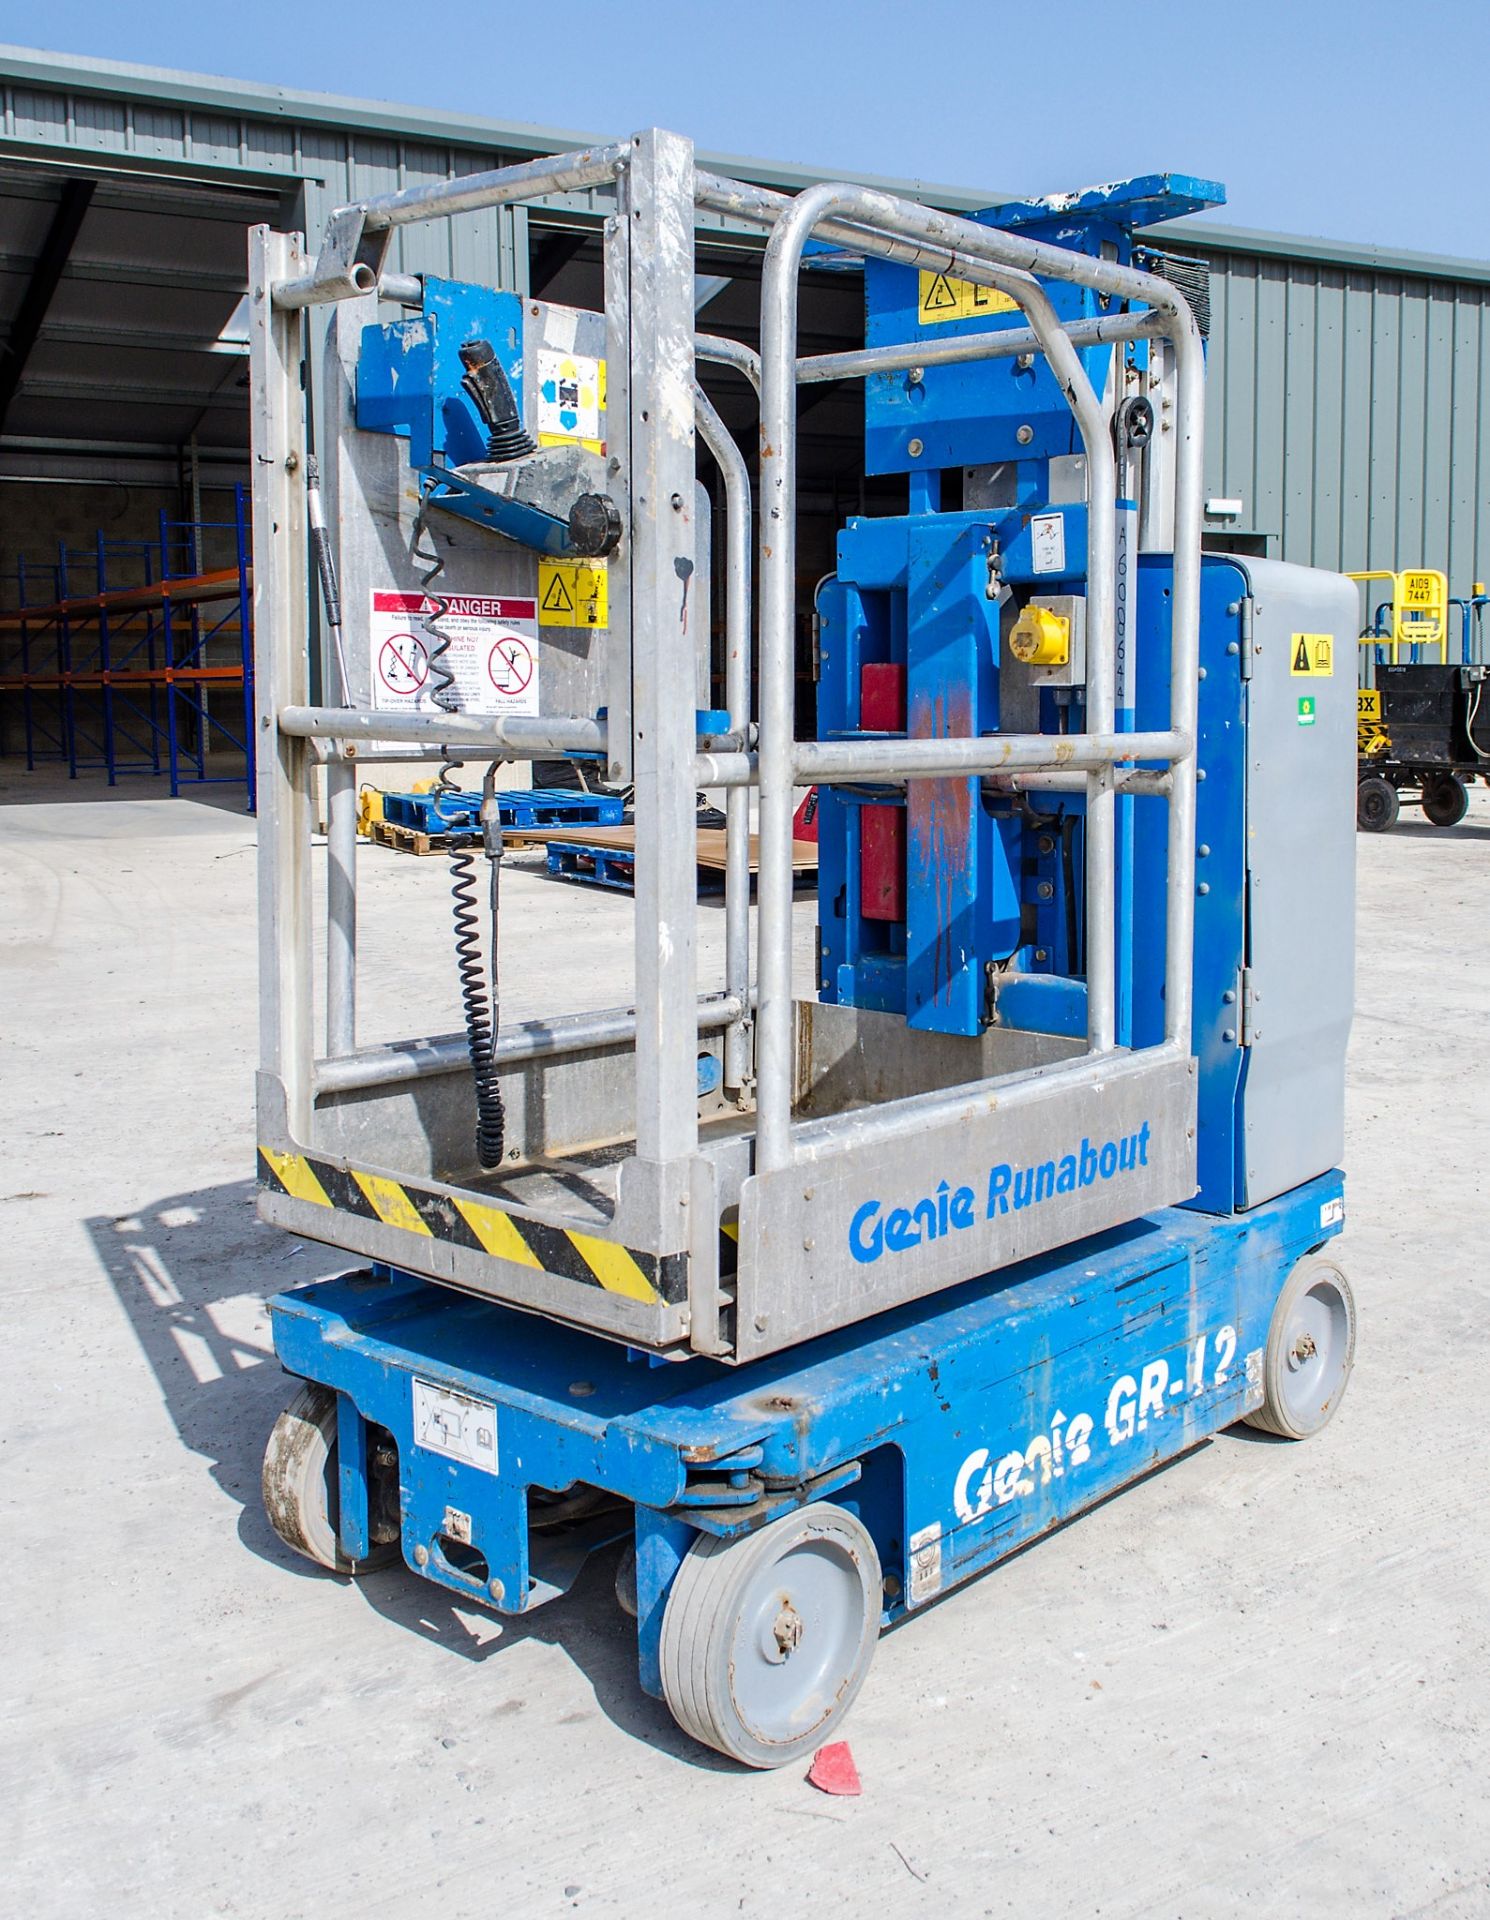 Genie GR-12 Runabout battery electric access platform Year: 2013 S/N: GR13-27512 Recorded Hours: 193